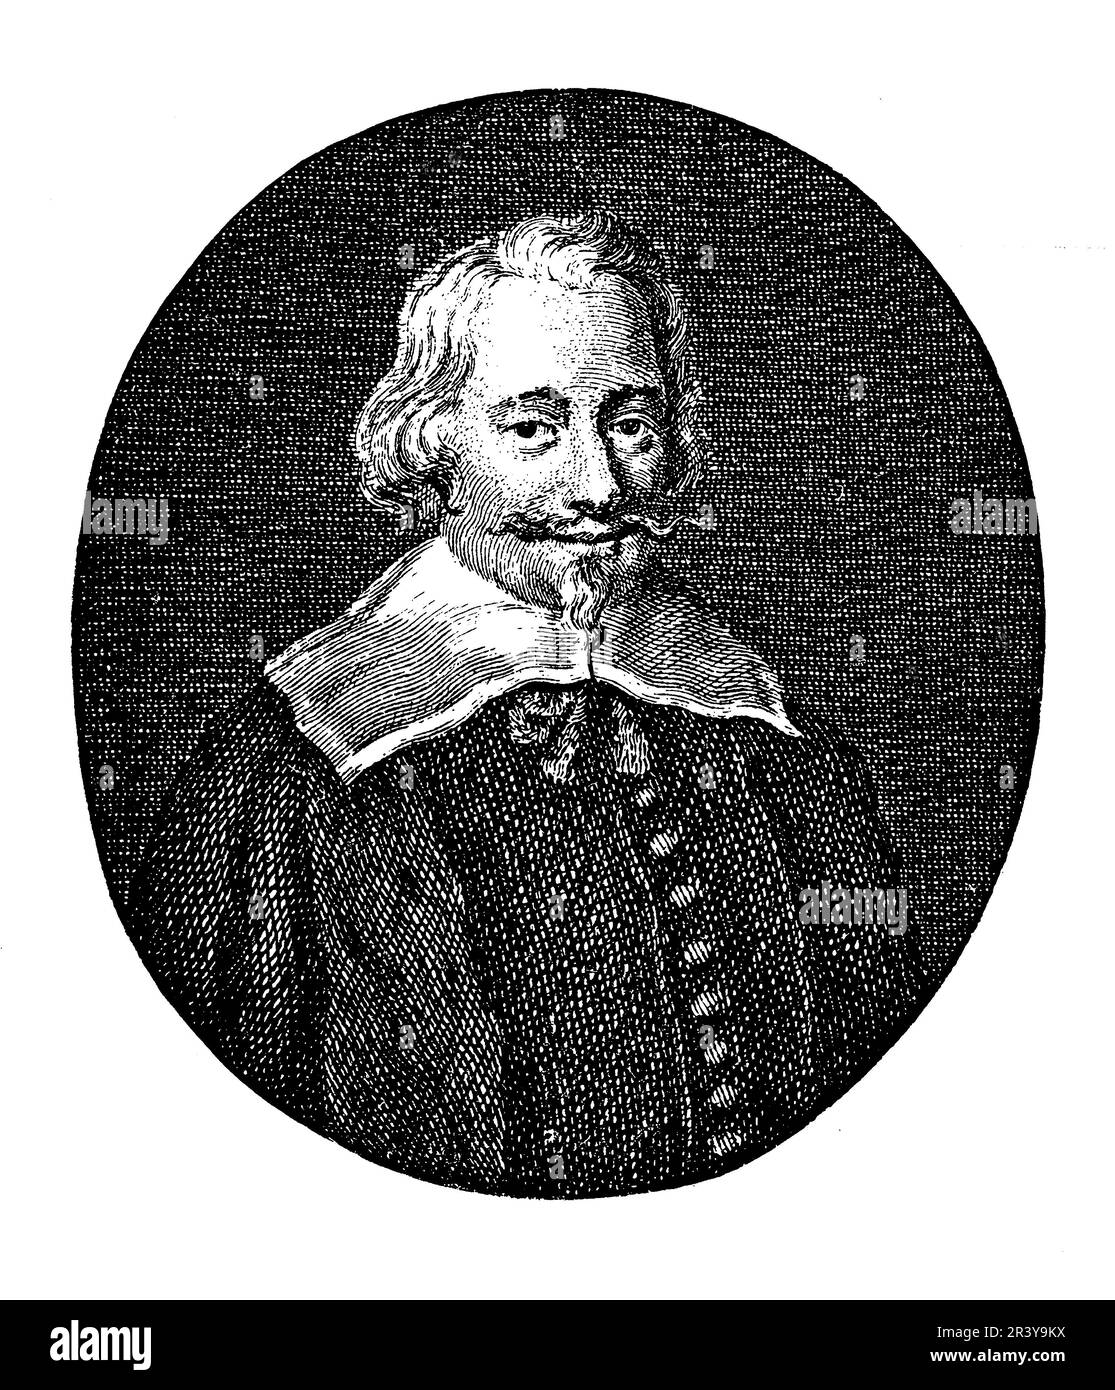 John Pym was a 17th-century English politician who played a key role in the lead up to the English Civil War. He was a member of Parliament and a leader of the opposition to King Charles I, advocating for greater parliamentary authority and religious reform. He played a key role in the impeachment of the king's chief minister, the Duke of Buckingham, and later in the passage of the Grand Remonstrance, which outlined Parliament's grievances against the king. He is remembered as a champion of parliamentary democracy and constitutional rights. Stock Photo